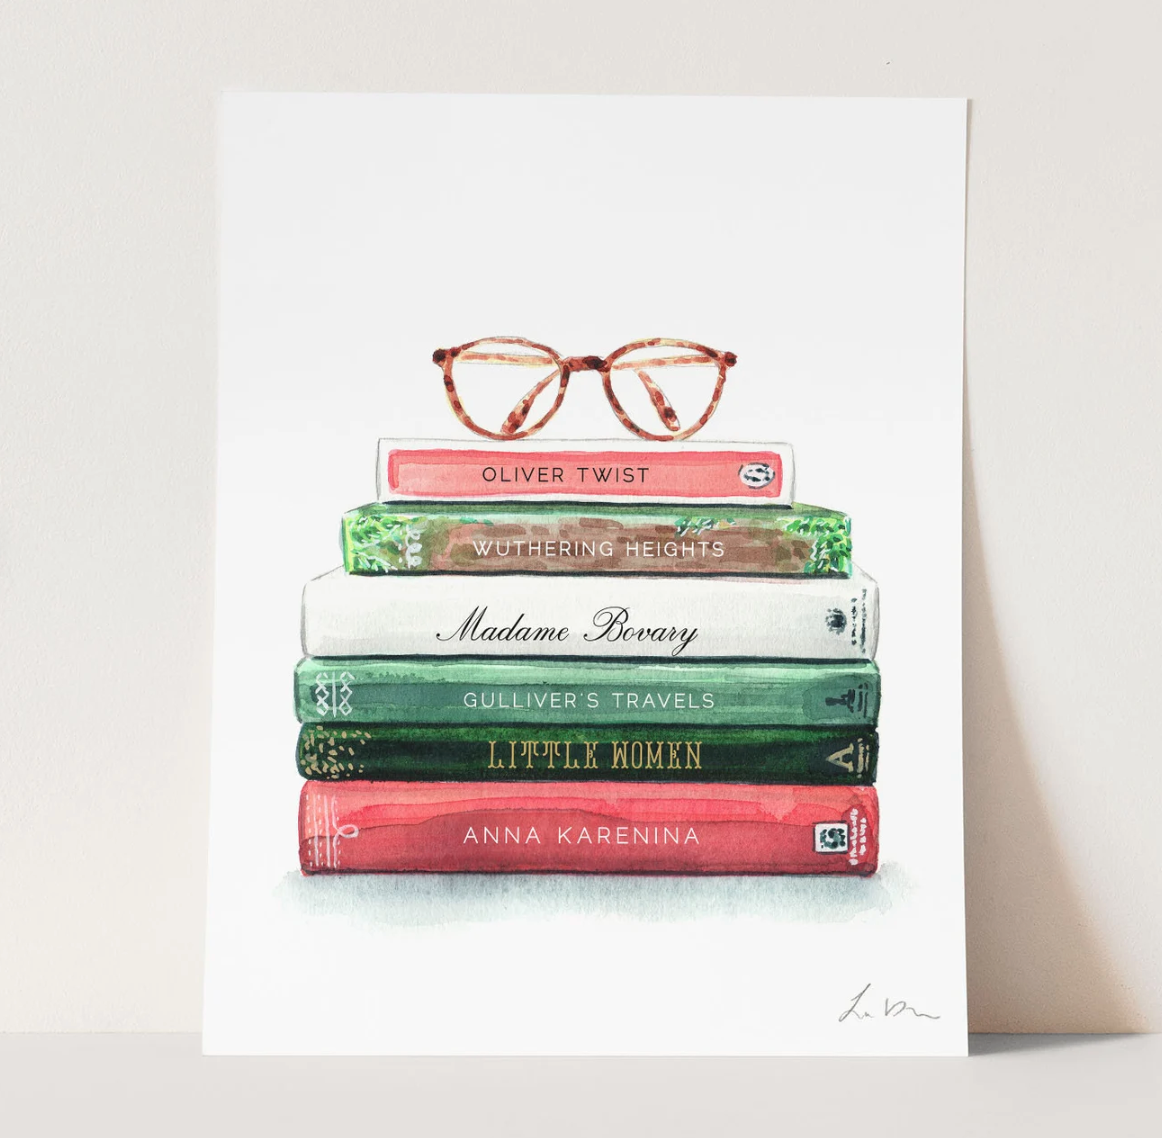 watercolor painting of several books with a pair of glasses on top